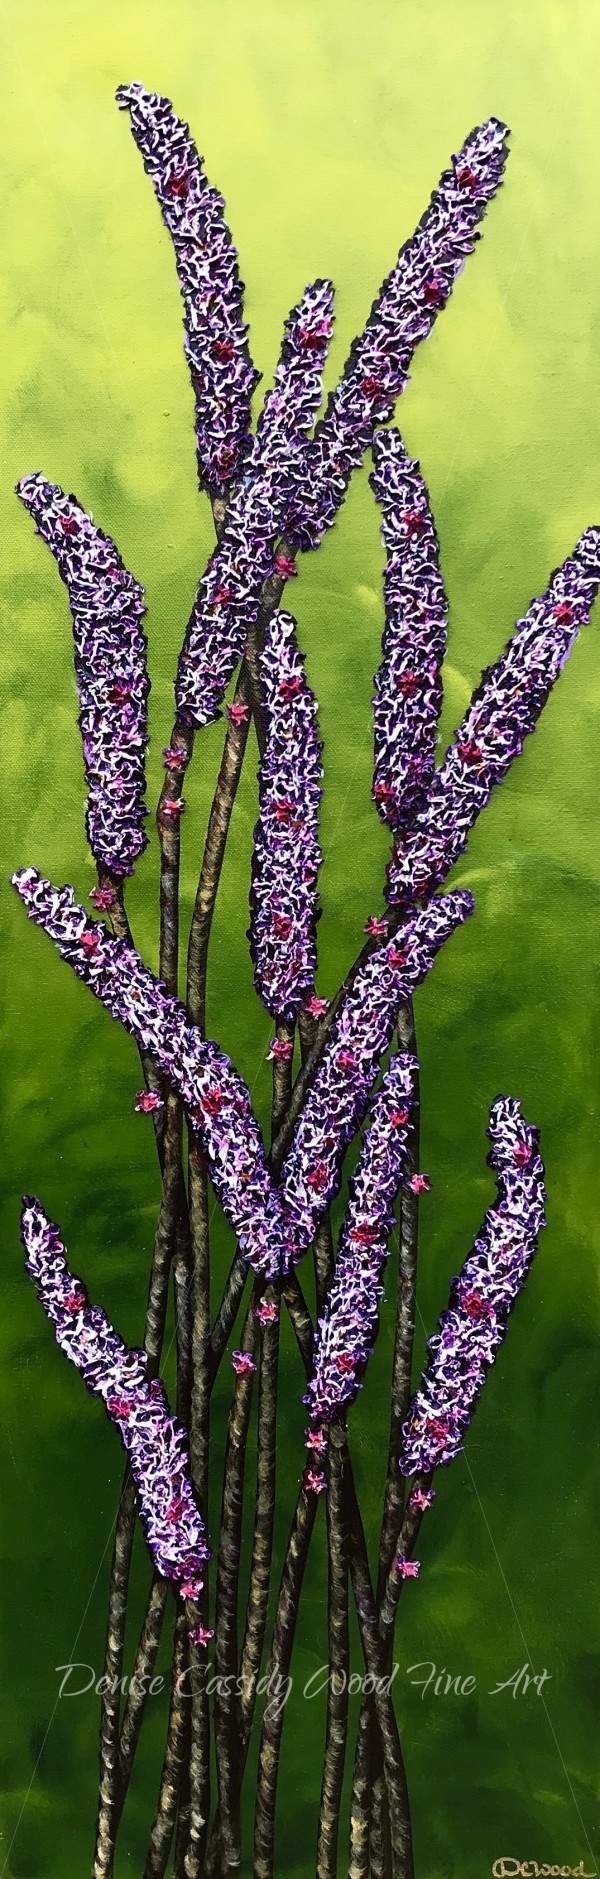 Lavender #622 by Denise Cassidy Wood